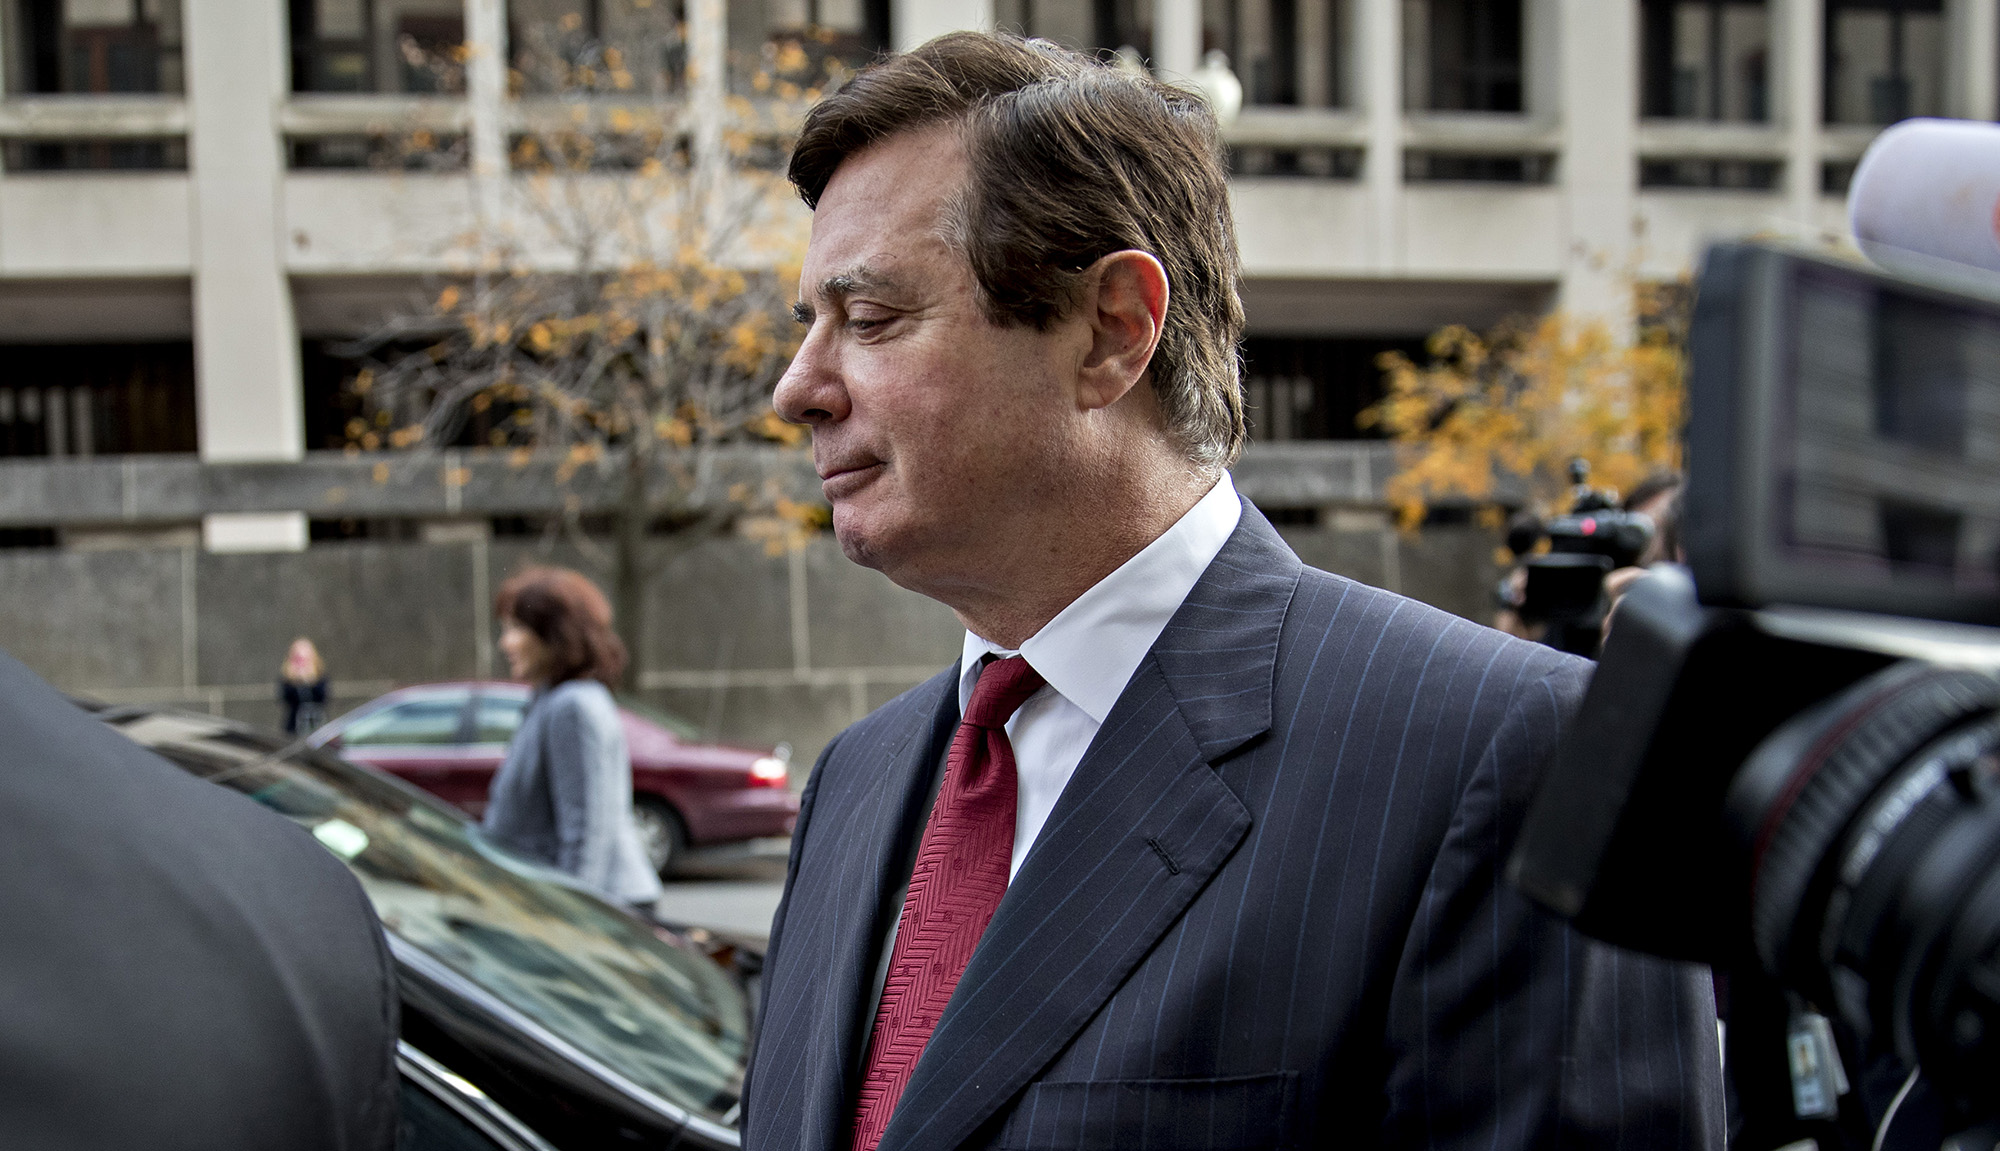 Paul Manafort, former campaign manager for Donald Trump, walks to his vehicle outside the U.S. Courthouse after a bond hearing in Washington, D.C. on&nbsp;Nov. 6, 2017.